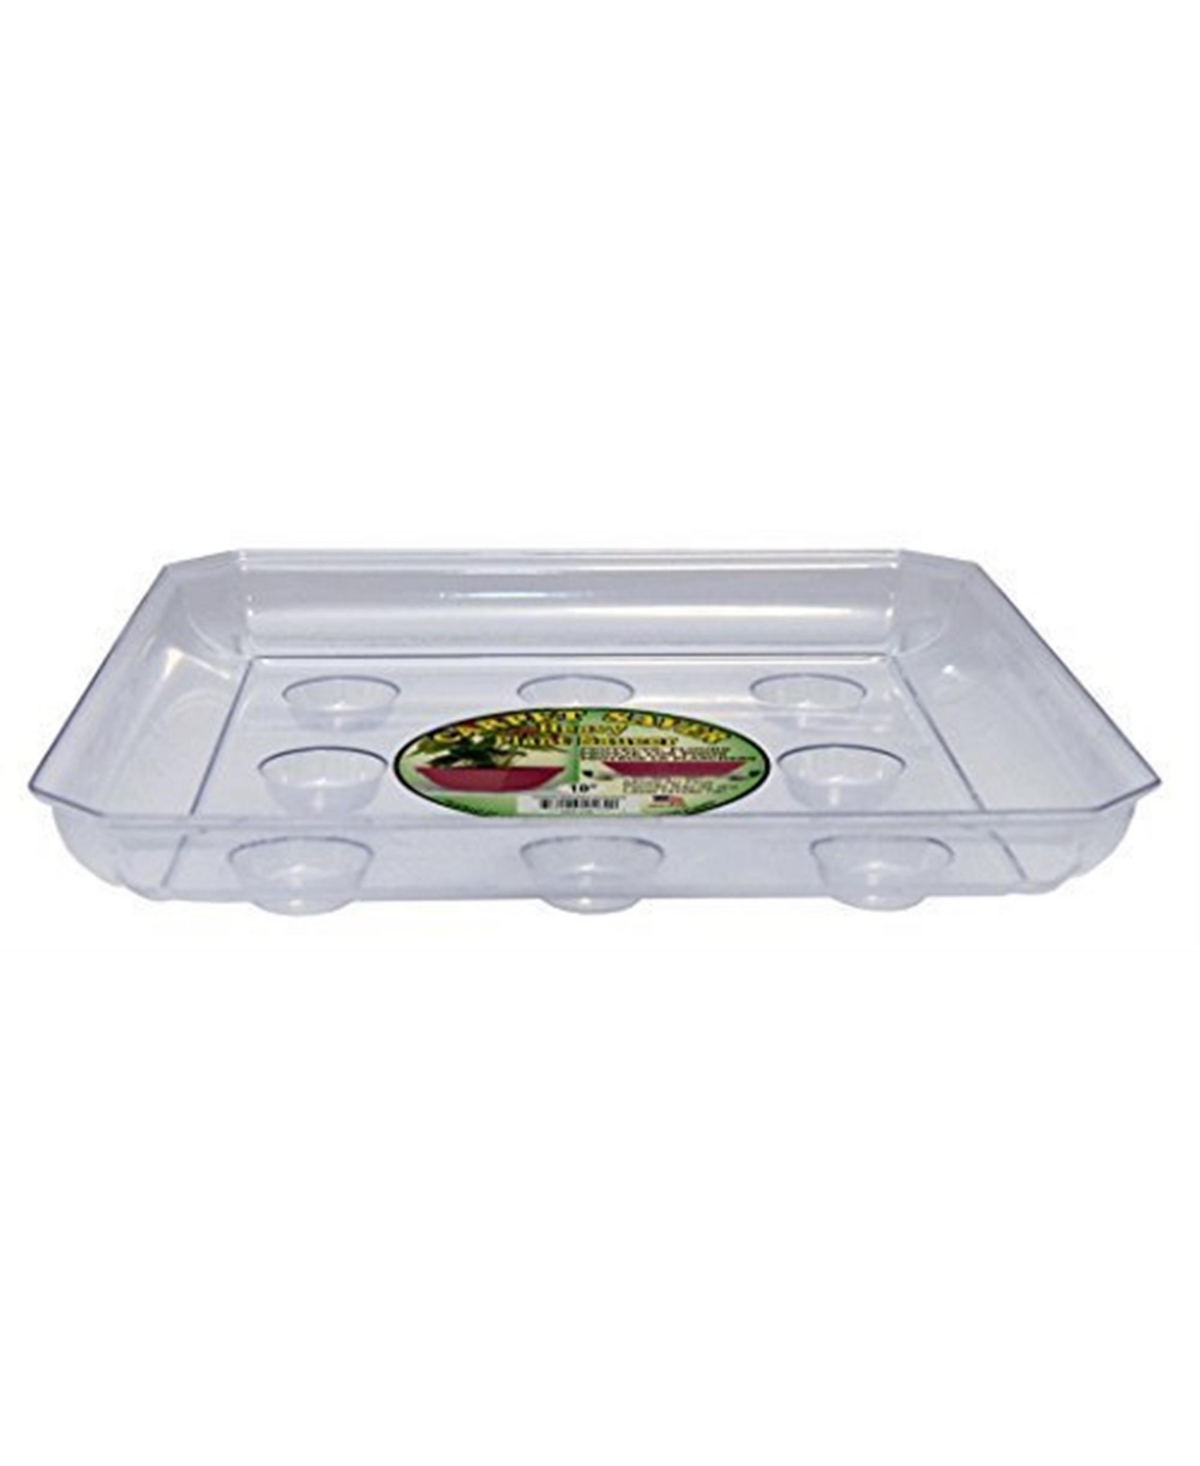 Curtis Wagner Square Plastics Carpet Saver Saucer, Clear Pack of 1 - Clear